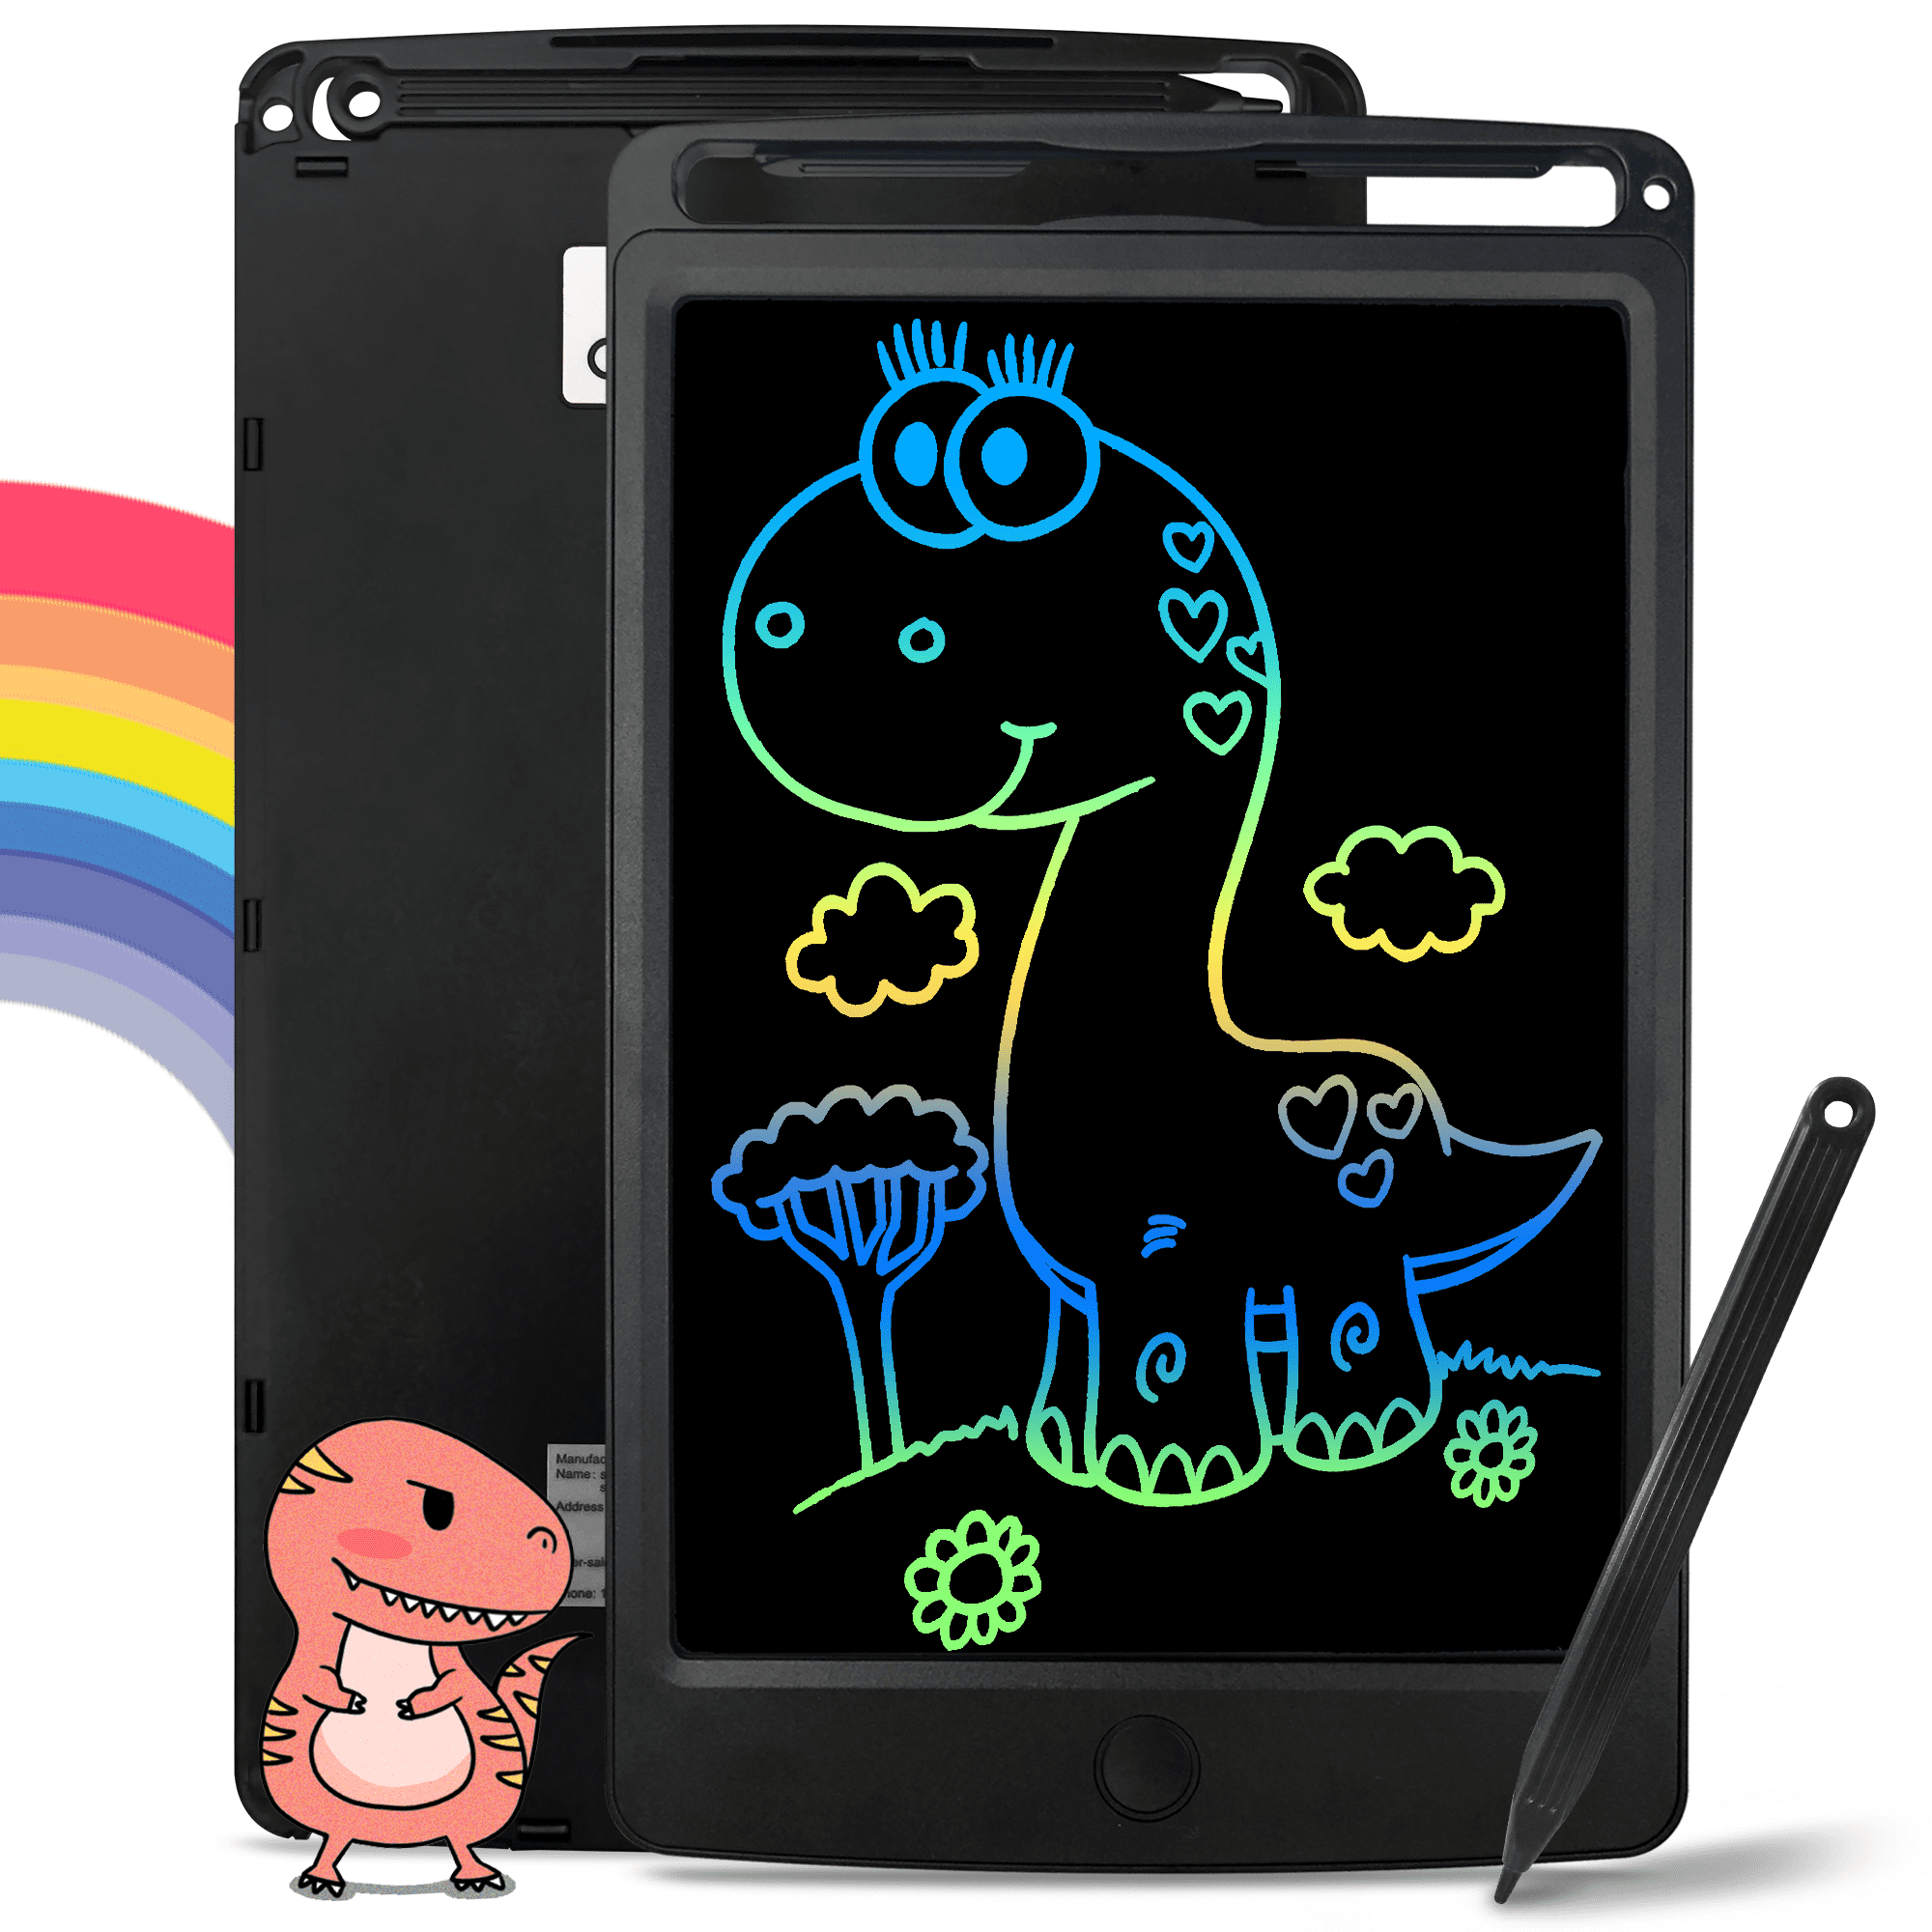 Pen tablets and displays for digital art: drawing like on paper